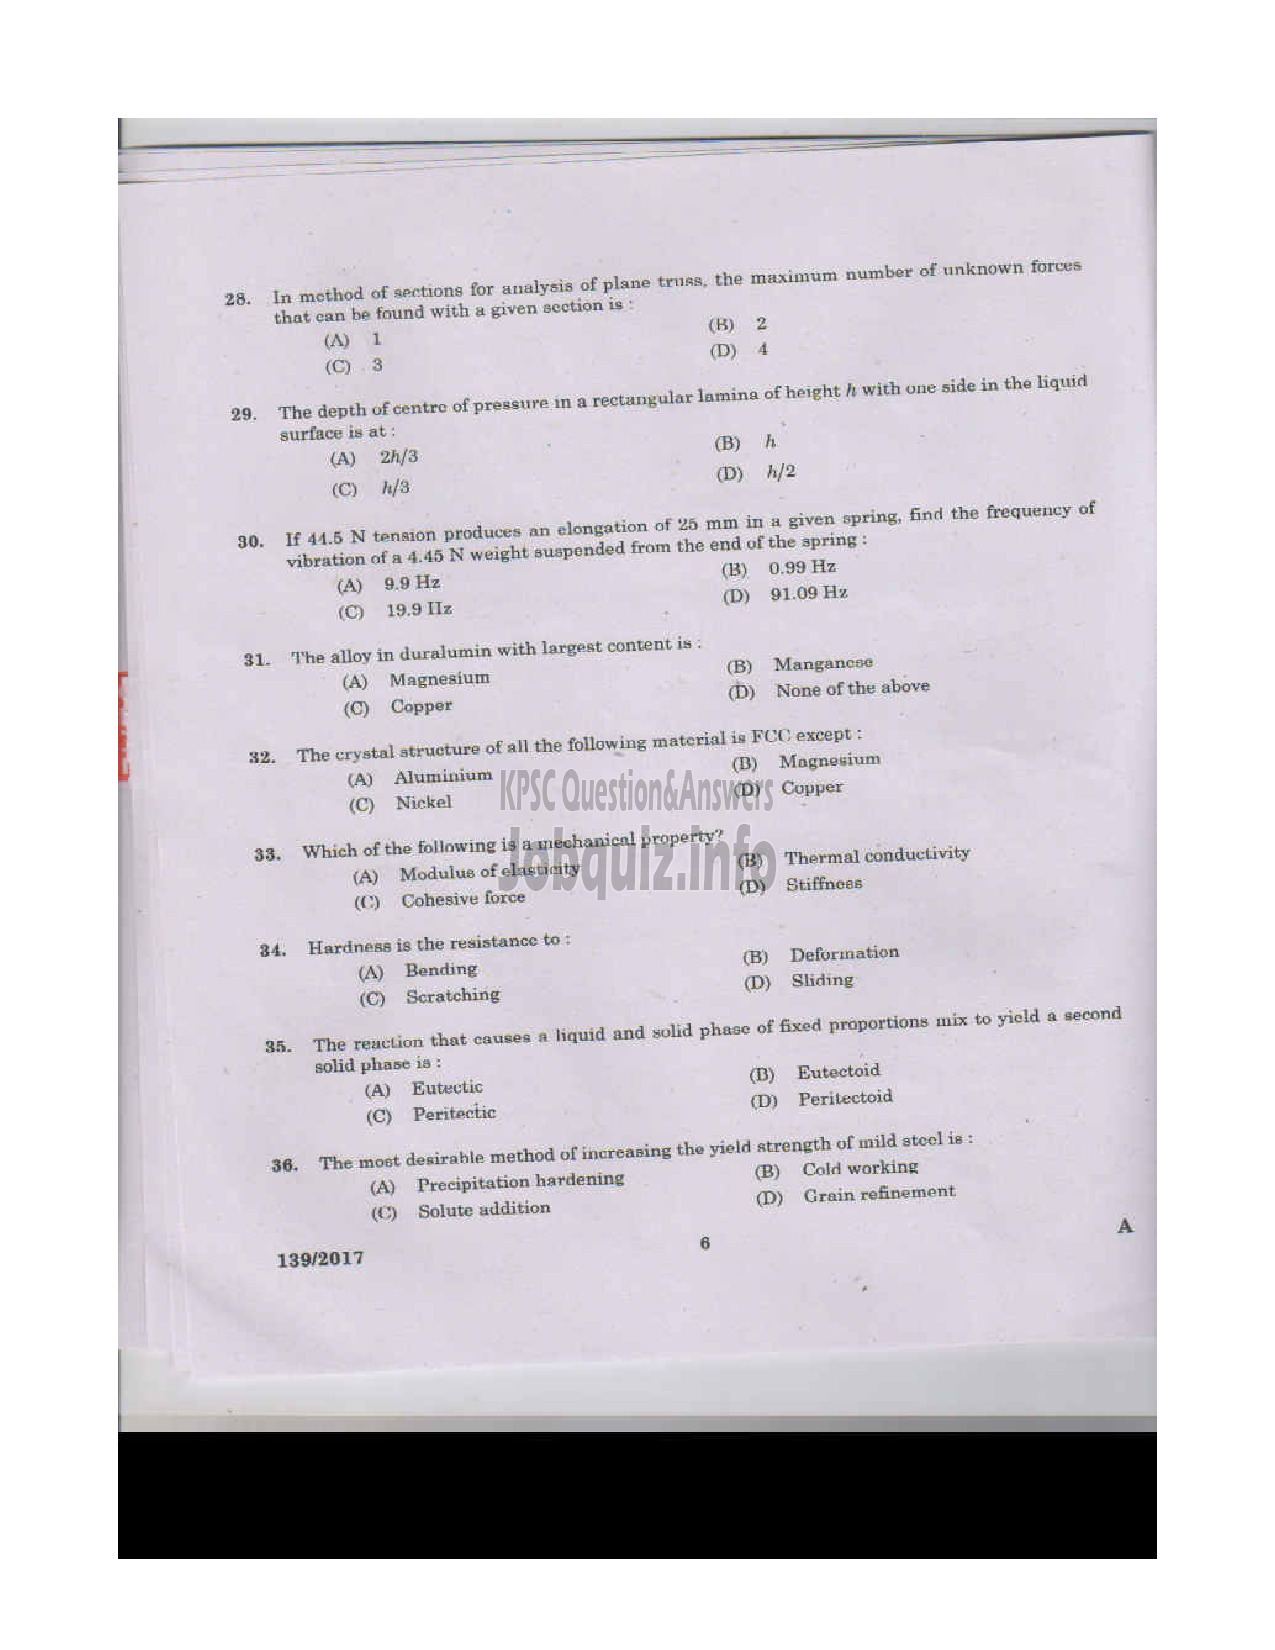 Kerala PSC Question Paper - ASSISTANT ENGINEER GROUND WATER DEPARTMENT-5